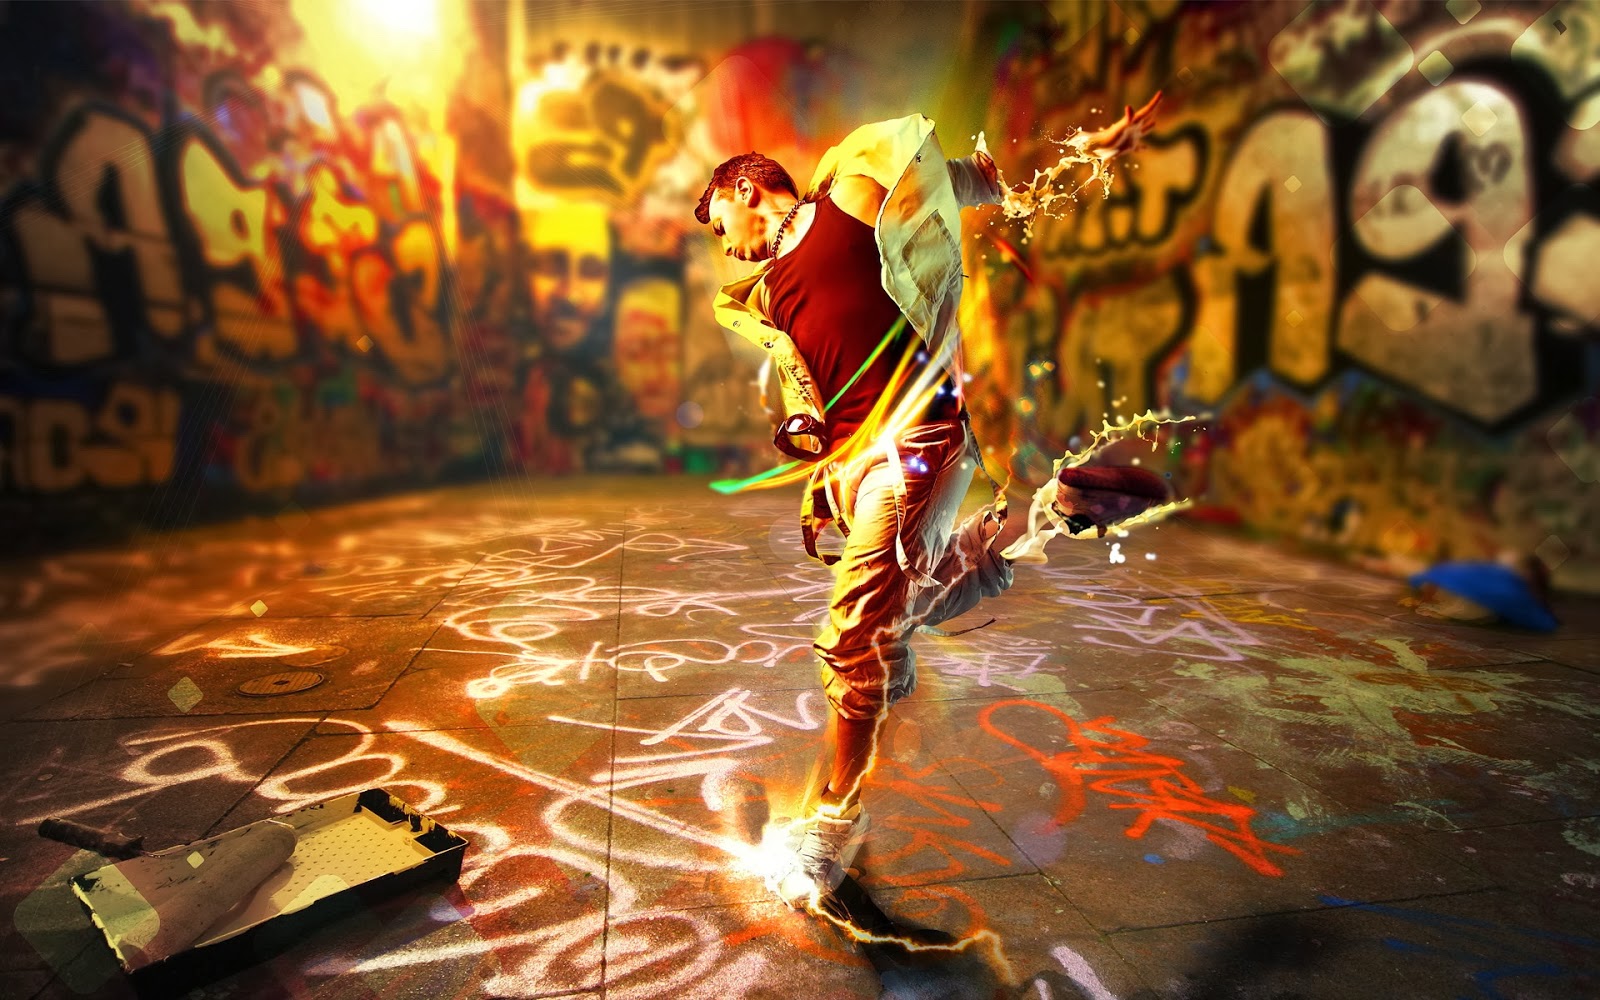 FREE HD PHOTO GALLERY Awesome 3D Street Art Wallpapers Full HD 2014